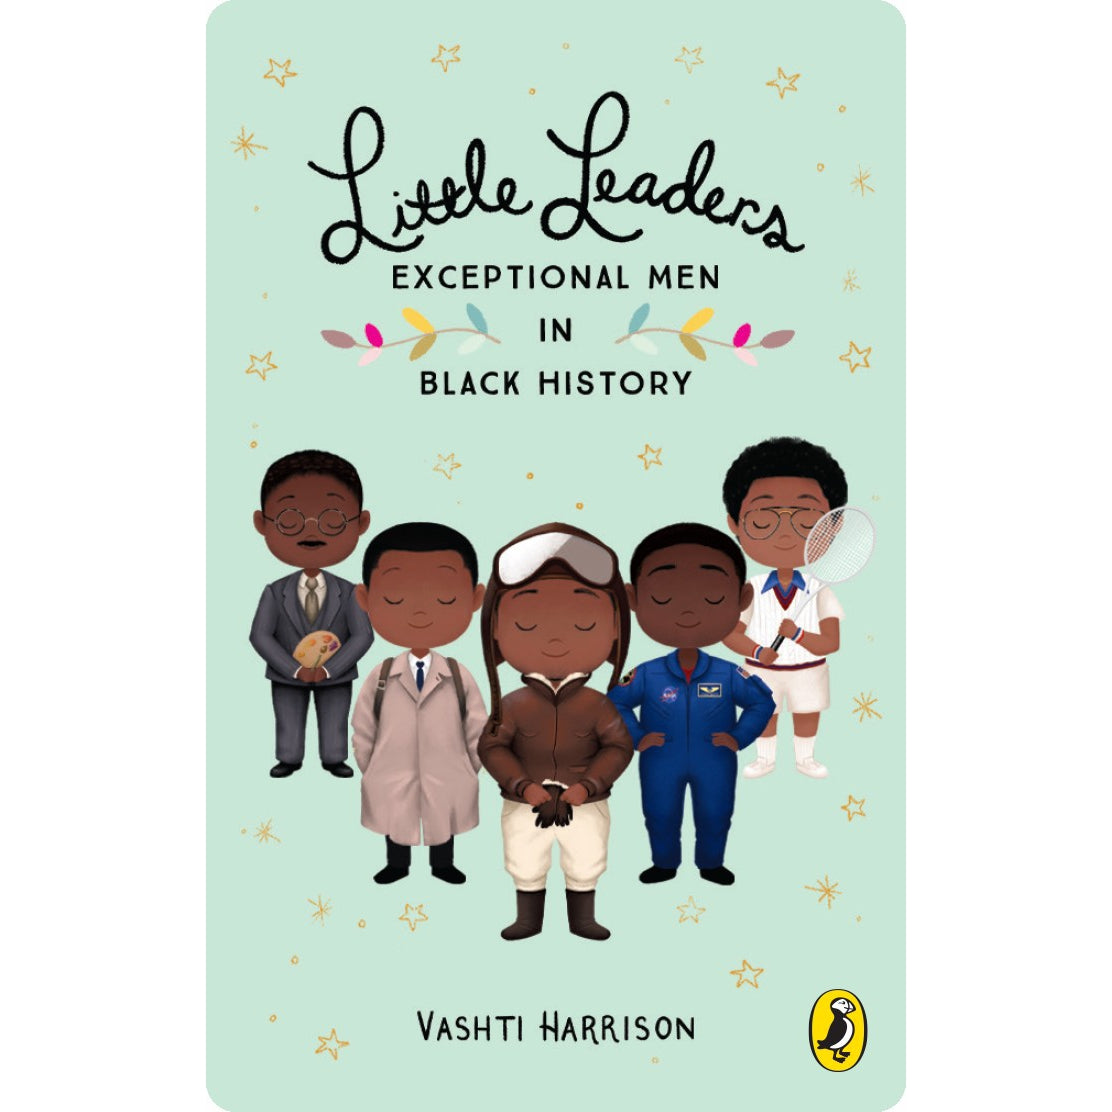 Yoto Card - Little Leaders: Exceptional Men in Black History - Child Friendly Audio Story Card for the Yoto Player